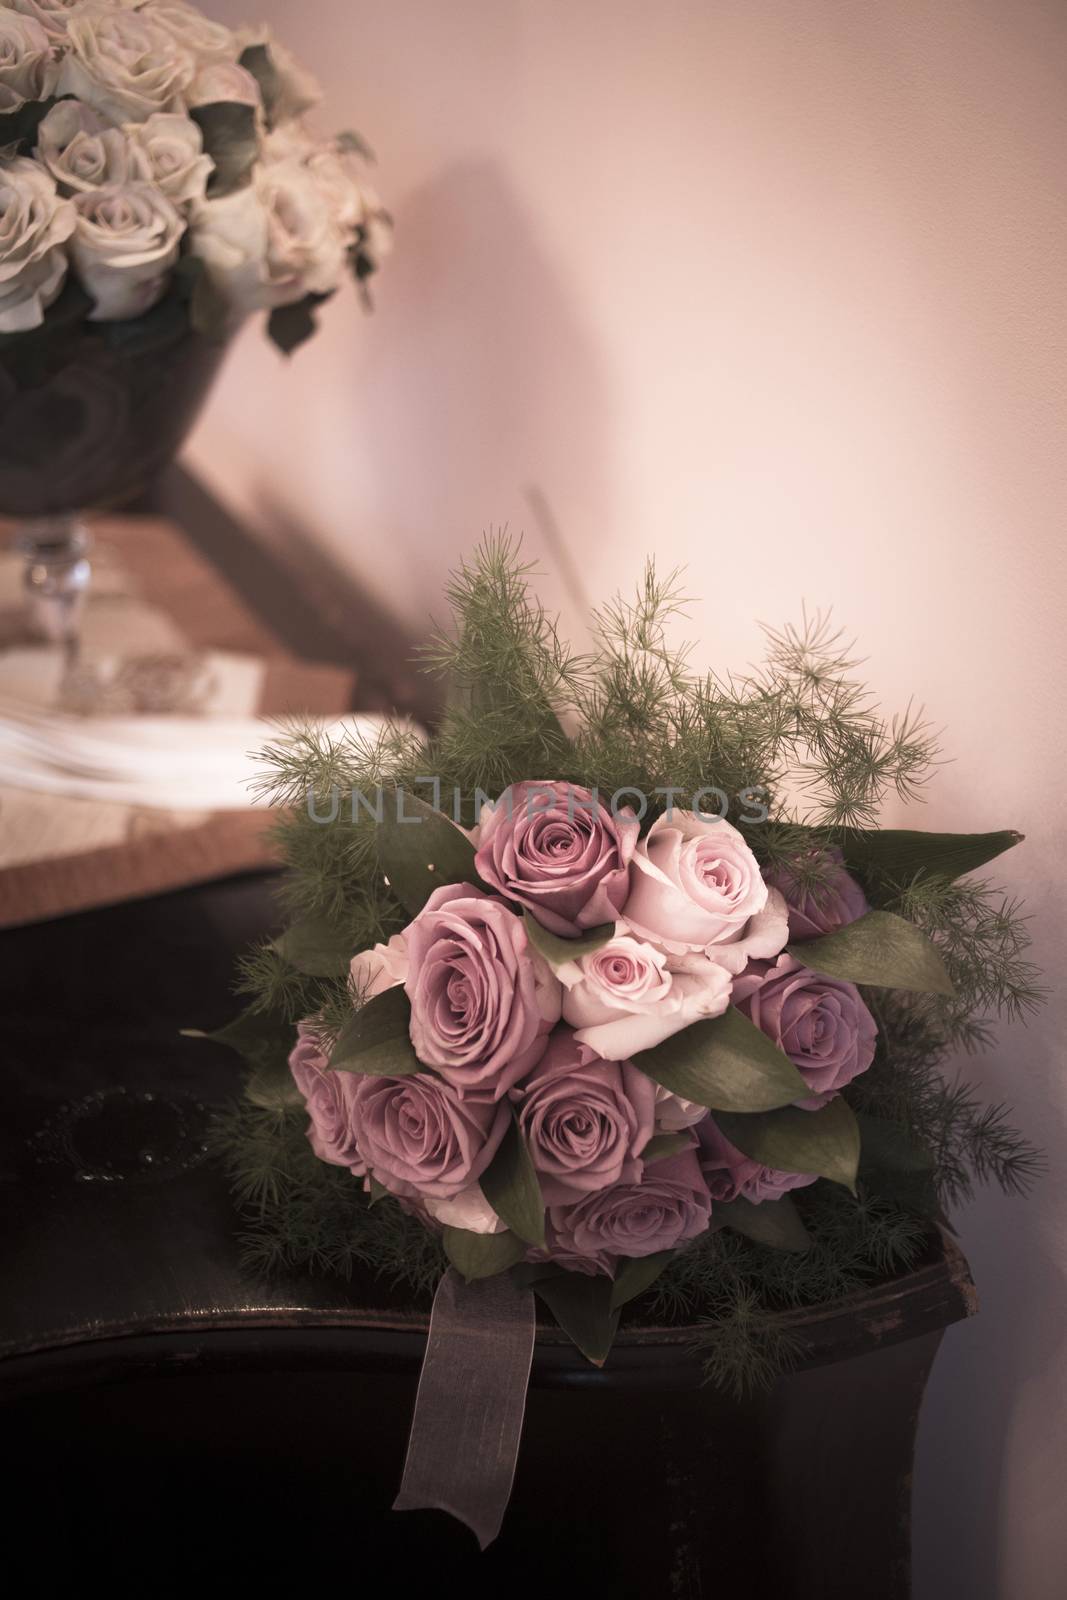 Wedding bridal bouquets of pink and white rose flowers by edwardolive